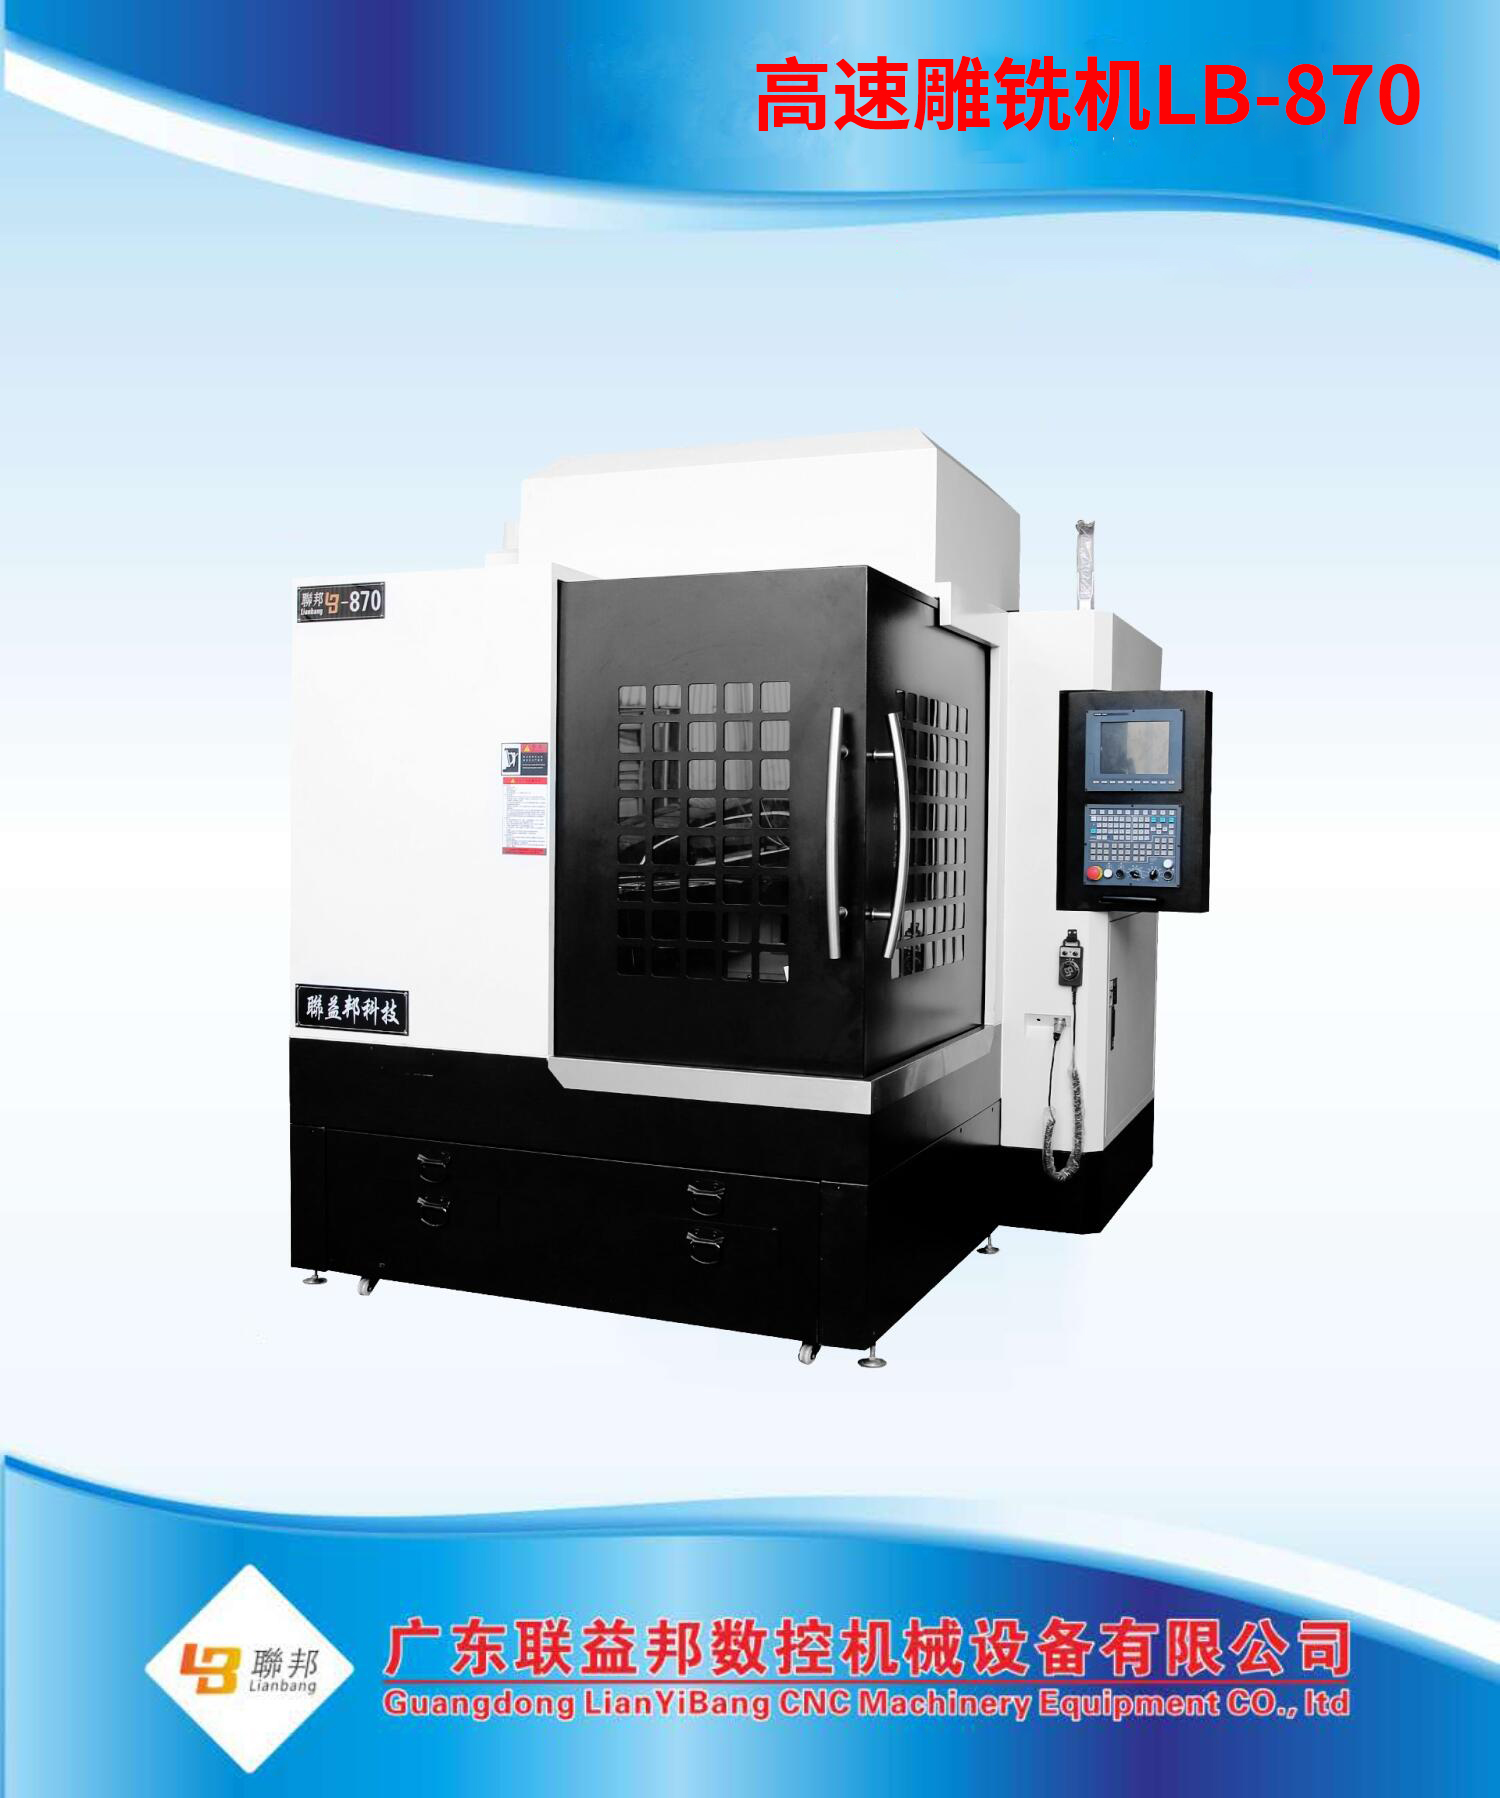  High speed engraving and milling machine lb-870